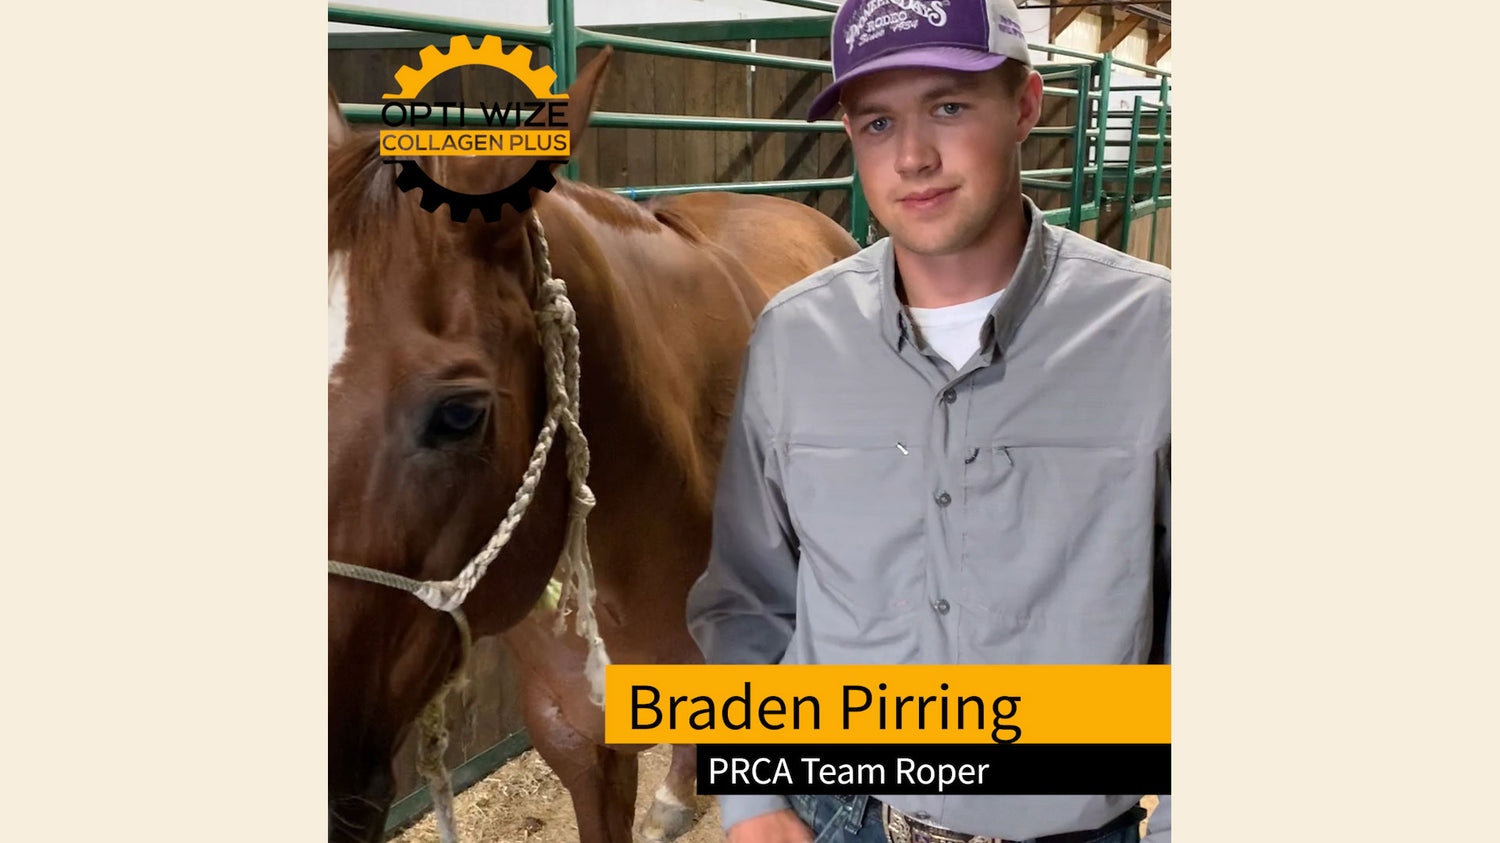 <p>Braden Pirring champion PRCA team roper uses OptiWize for an equine fractured Coffin bone. OptiWize is his go to rehab supplement for his horse's bone fracture. He also feeds it for a joint tendon and ligament supplement for preventative maintenance in his competition horses.</p>